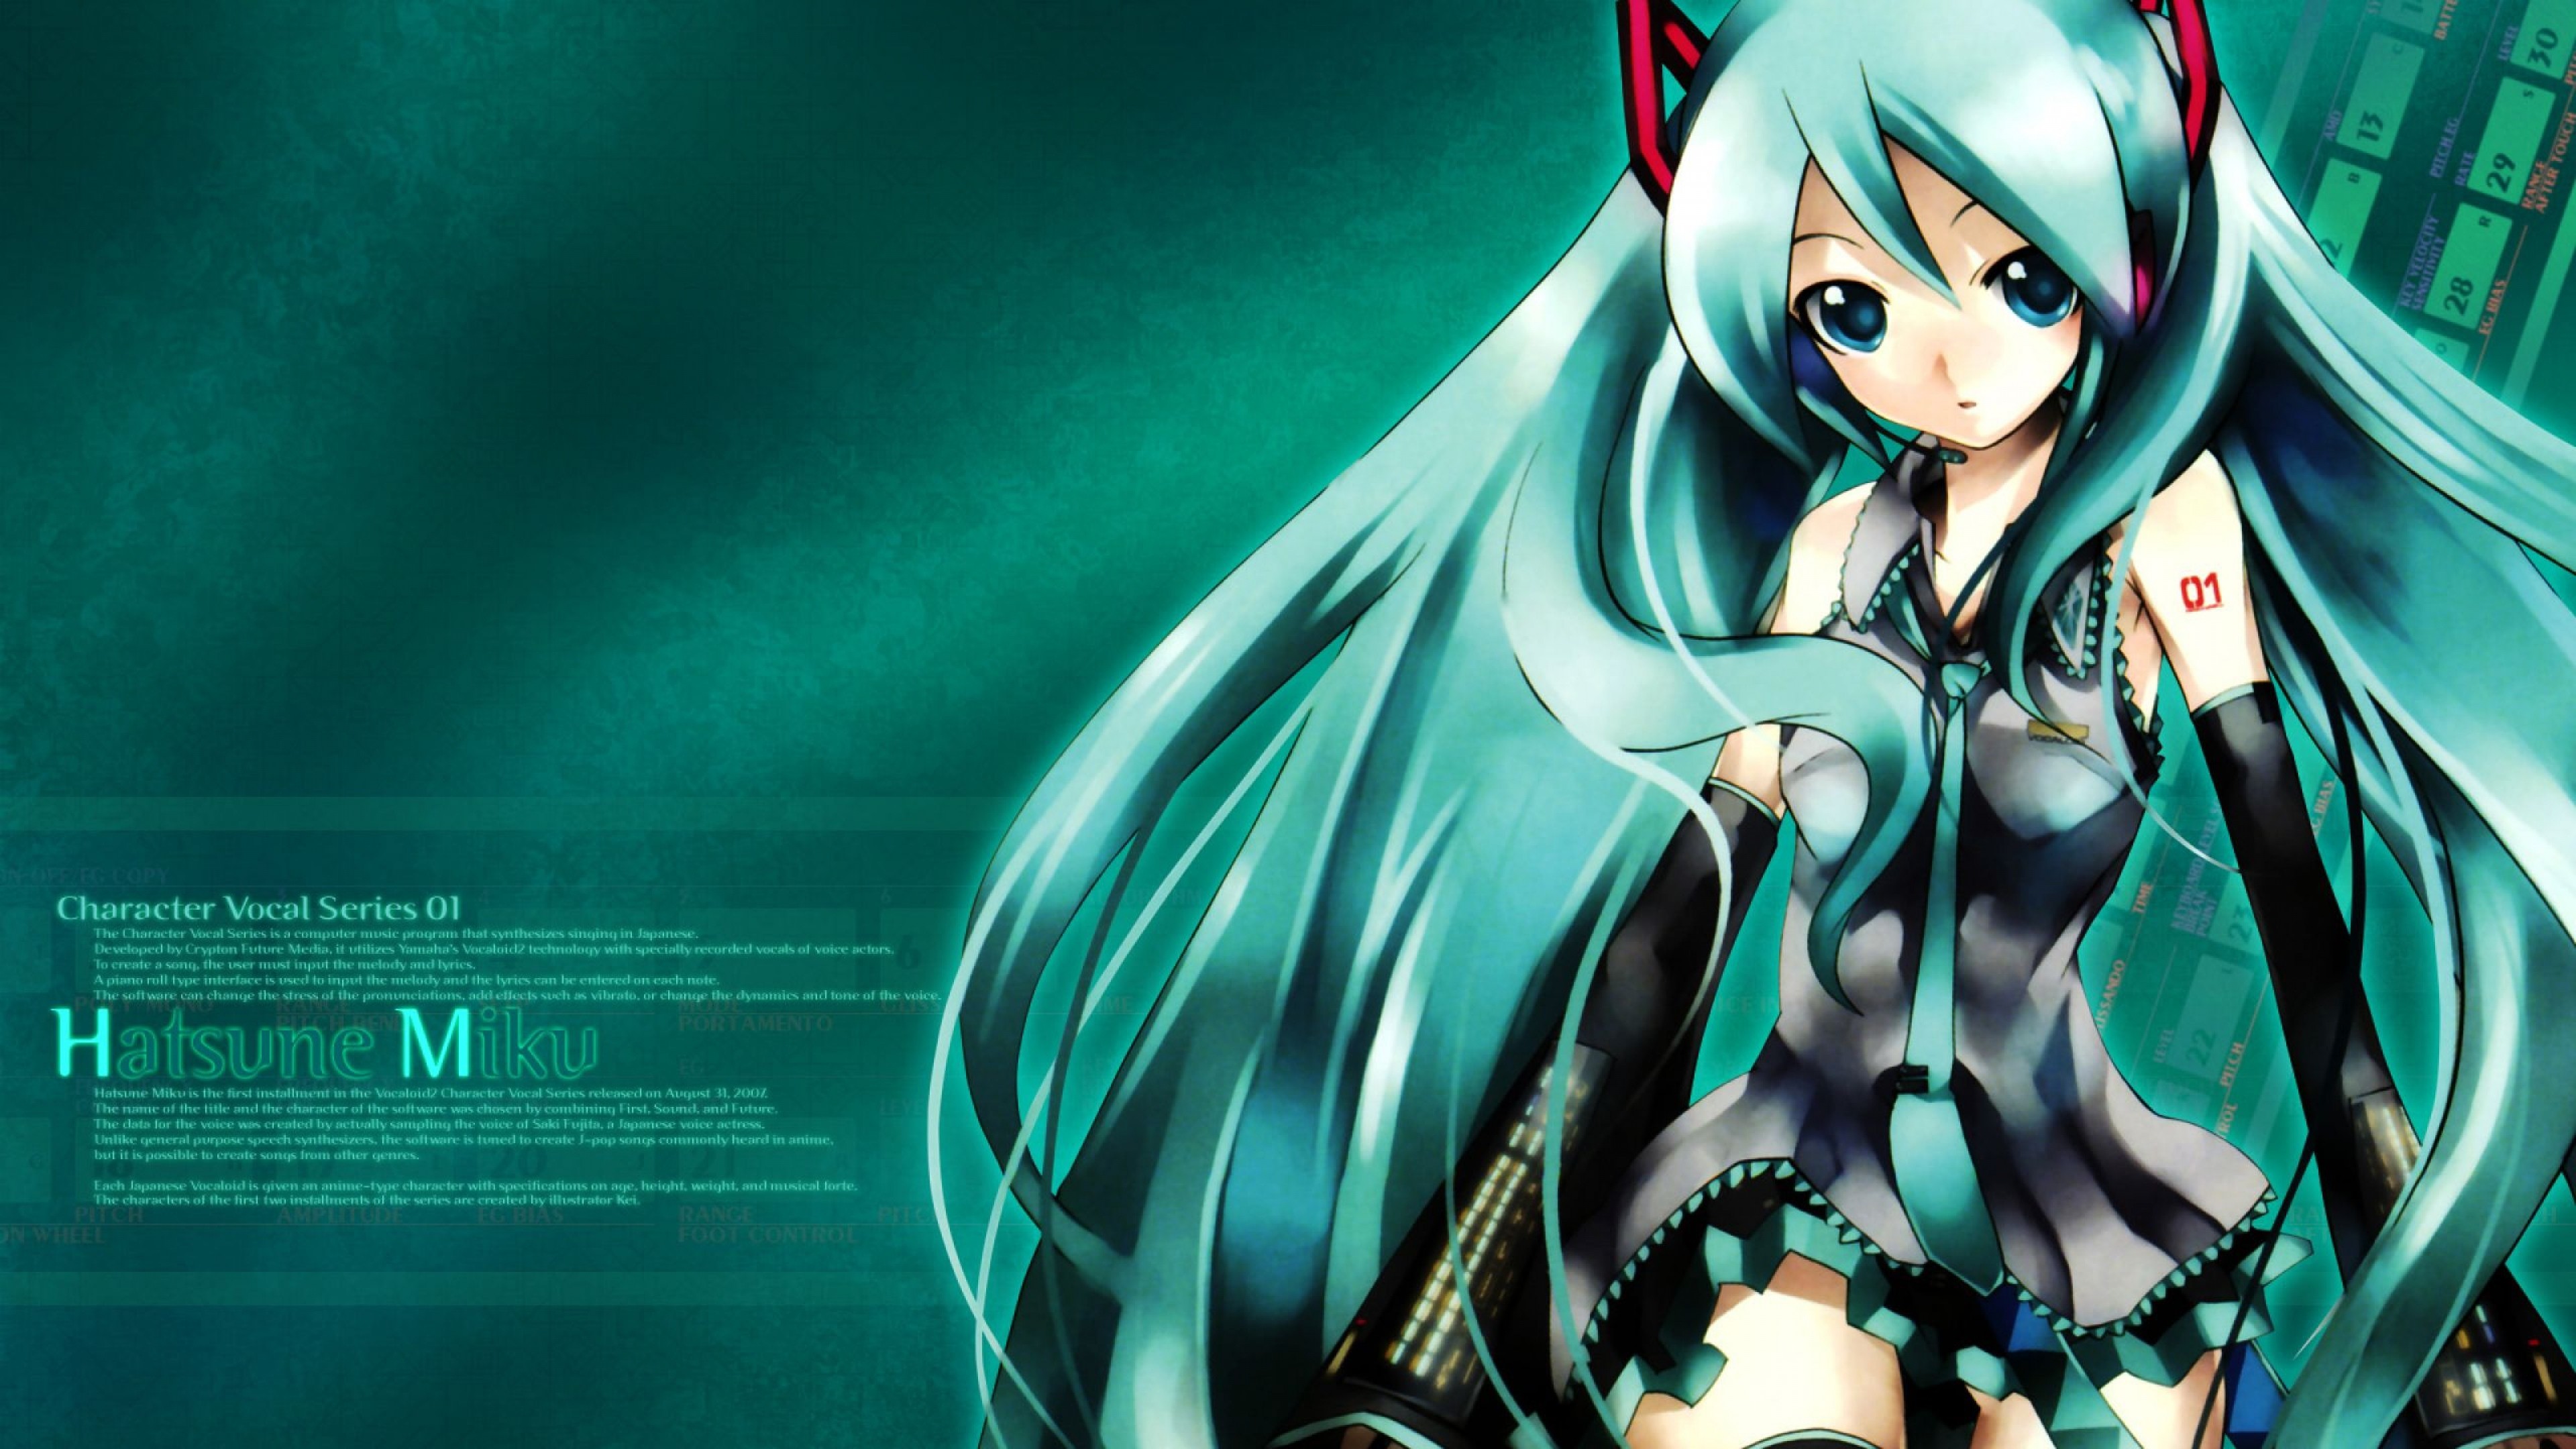 Awesome and Cool Miku Hatsune wallpaper available on Google Chrome theme  maker available on my account